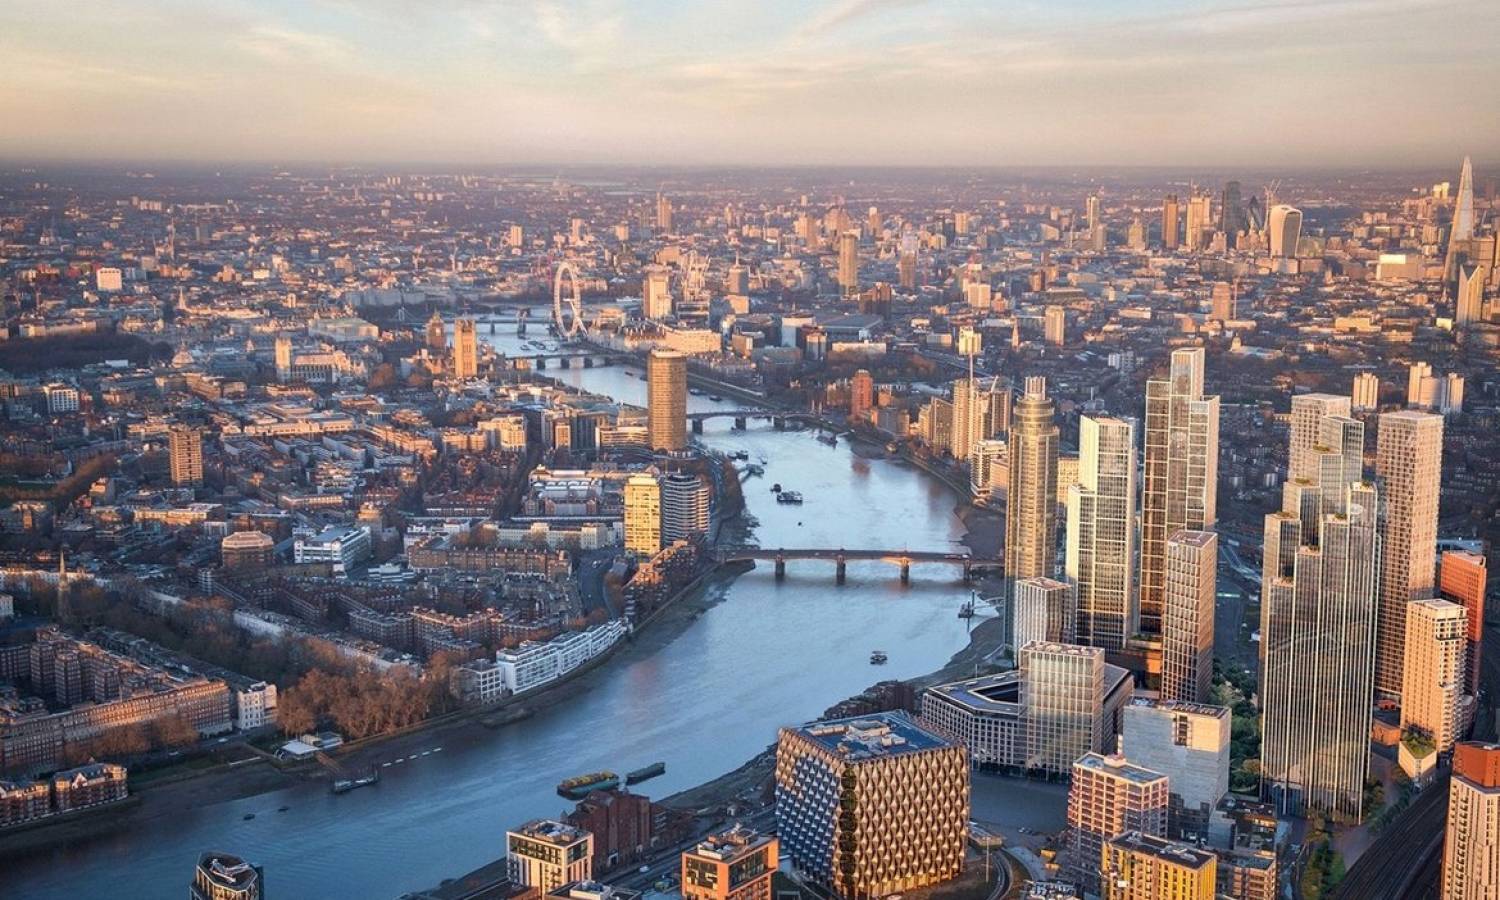 Property prices and rents might soar nearby Nine Elms and Battersea Power Station